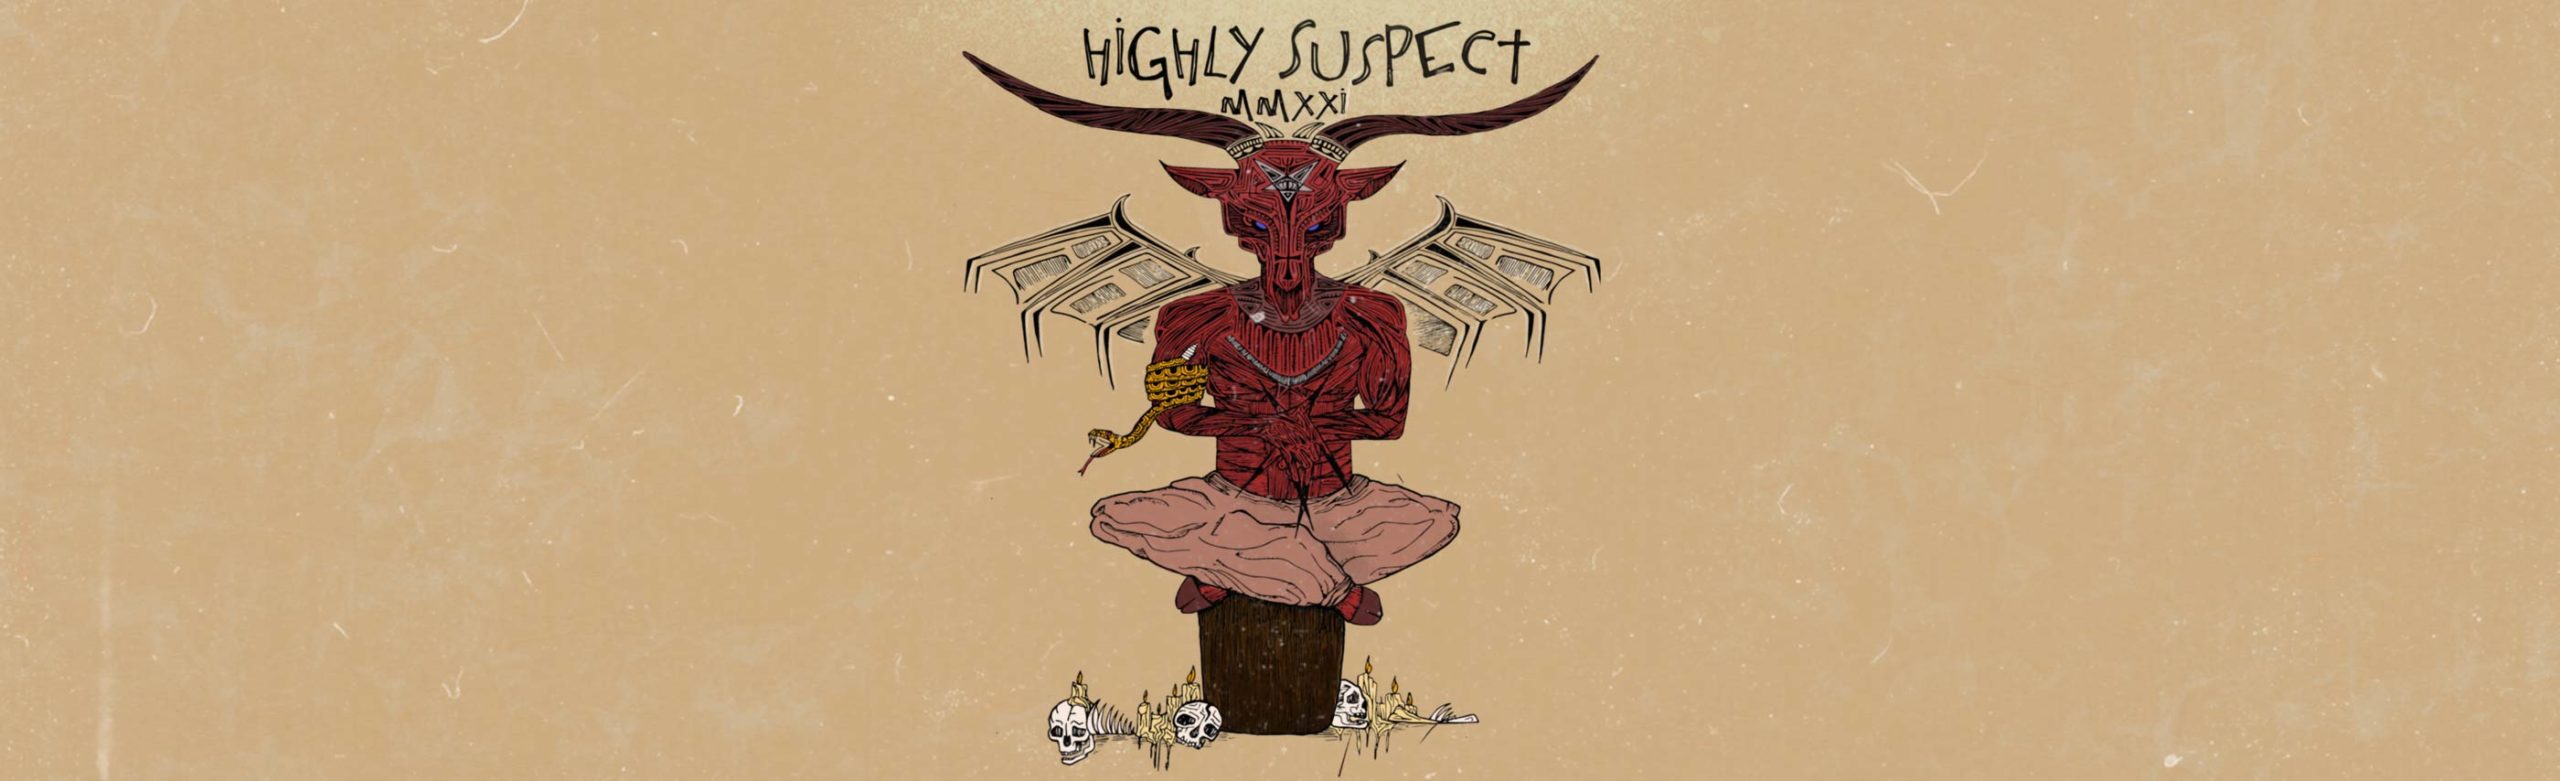 Highly Suspect Tickets + Autographed Poster Giveaway Image